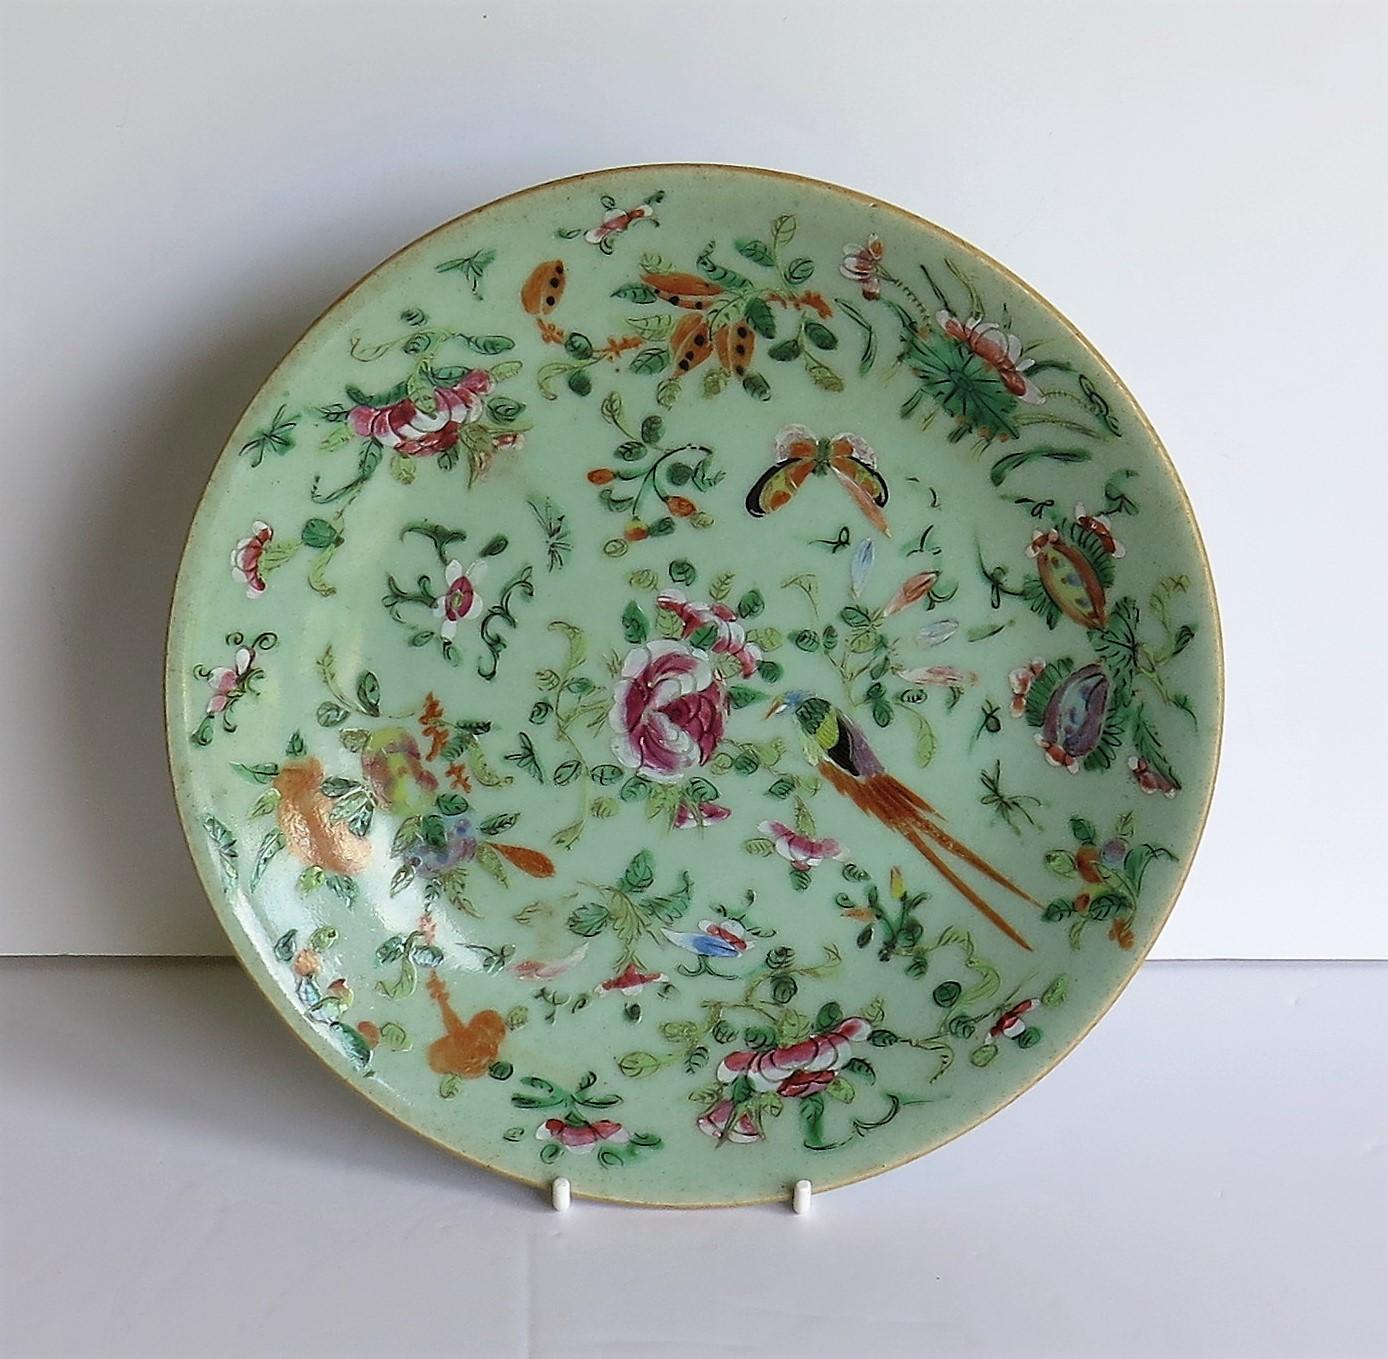 This is a very good 19th century Chinese Export, (Canton) deep plate or dish, which we date to the early 19th century, circa 1820 of the Qing dynasty.

The plate has a light green, Celadon ground glaze with beautifully hand painted decoration, in